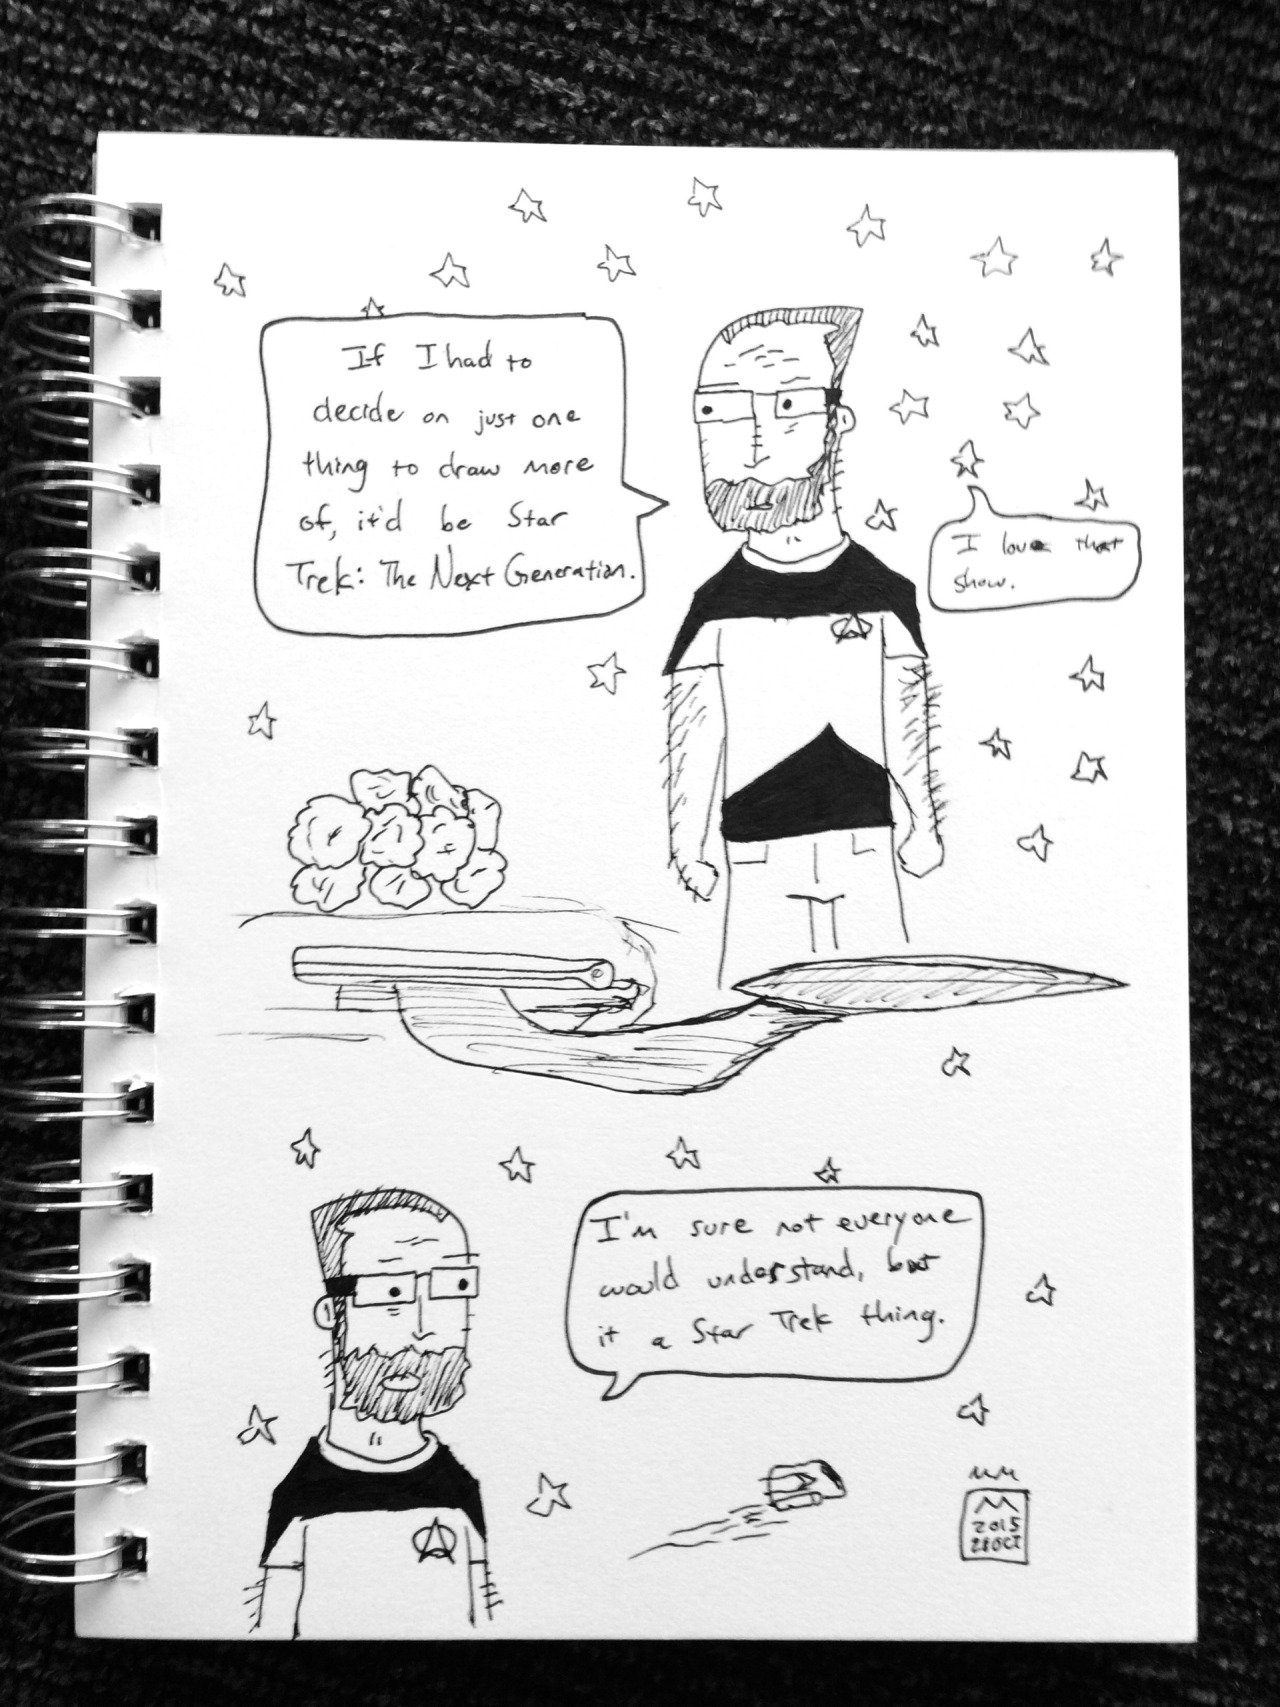 michaelmclean:
“ Inktober 28 October 2015 - Star Trek the next generation
”
It’s Inktober! To celebrate I’m posting some of my favorites from over the years. Plus check back everyday for new inktober comics! I’ve got to say that this is true. I need...